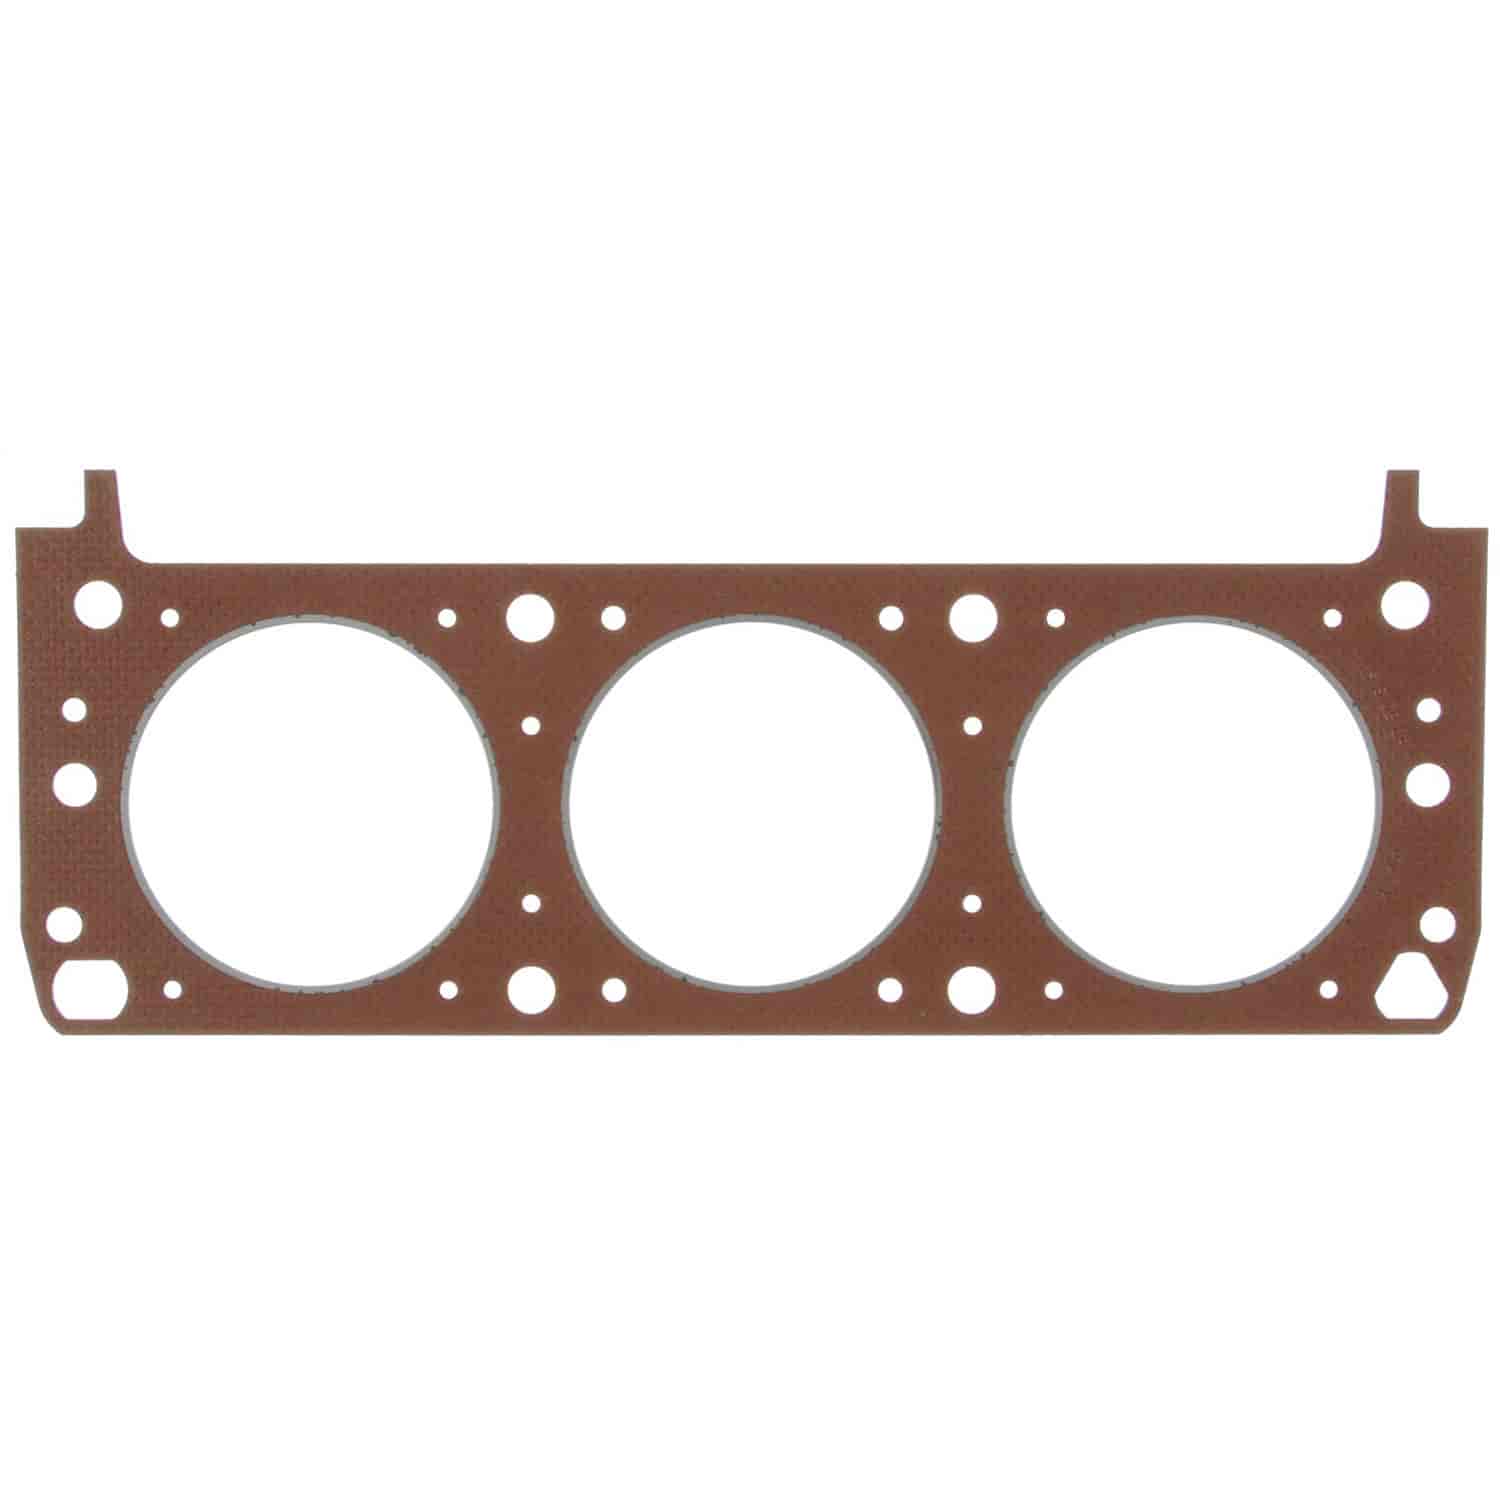 Cylinder Head Gasket Bui  Cad  Chev-Pass&Trk  GMC  Jeep  Olds  Pont  Can Pont 173 189 Eng. 80-93  Isuz